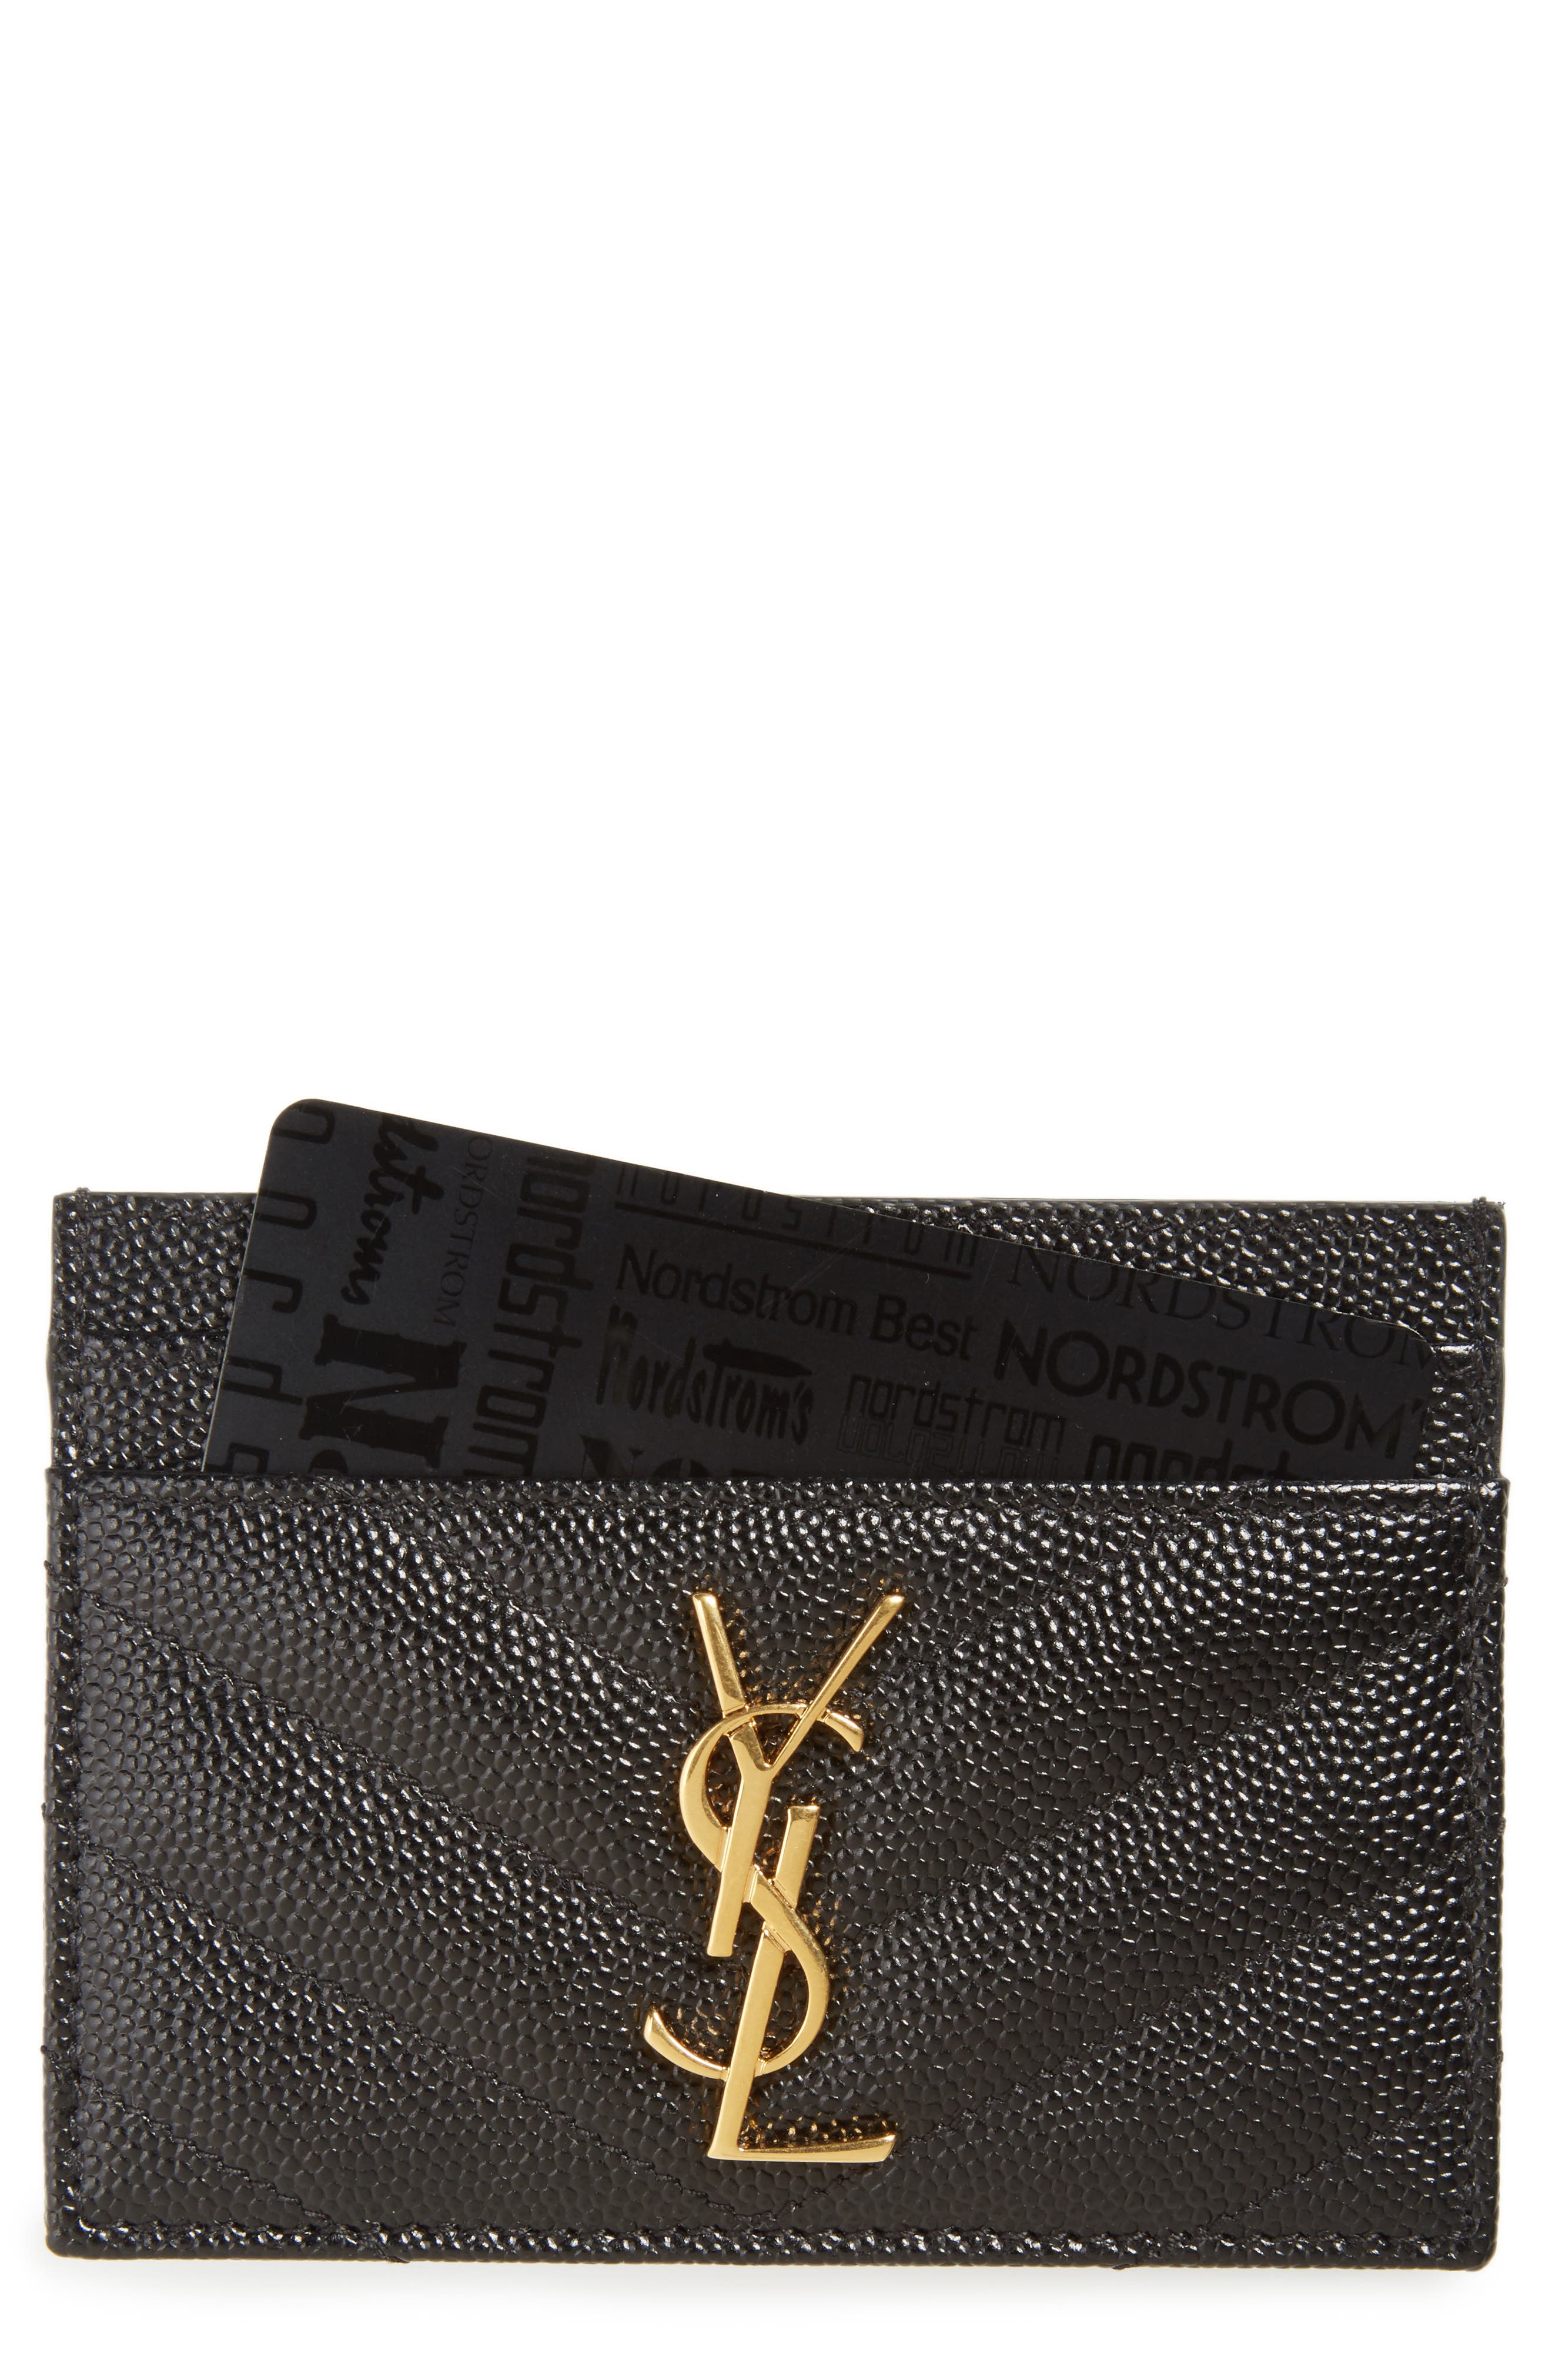 Saint Laurent Monogram Quilted Leather Credit Card Case in Nero at Nordstrom